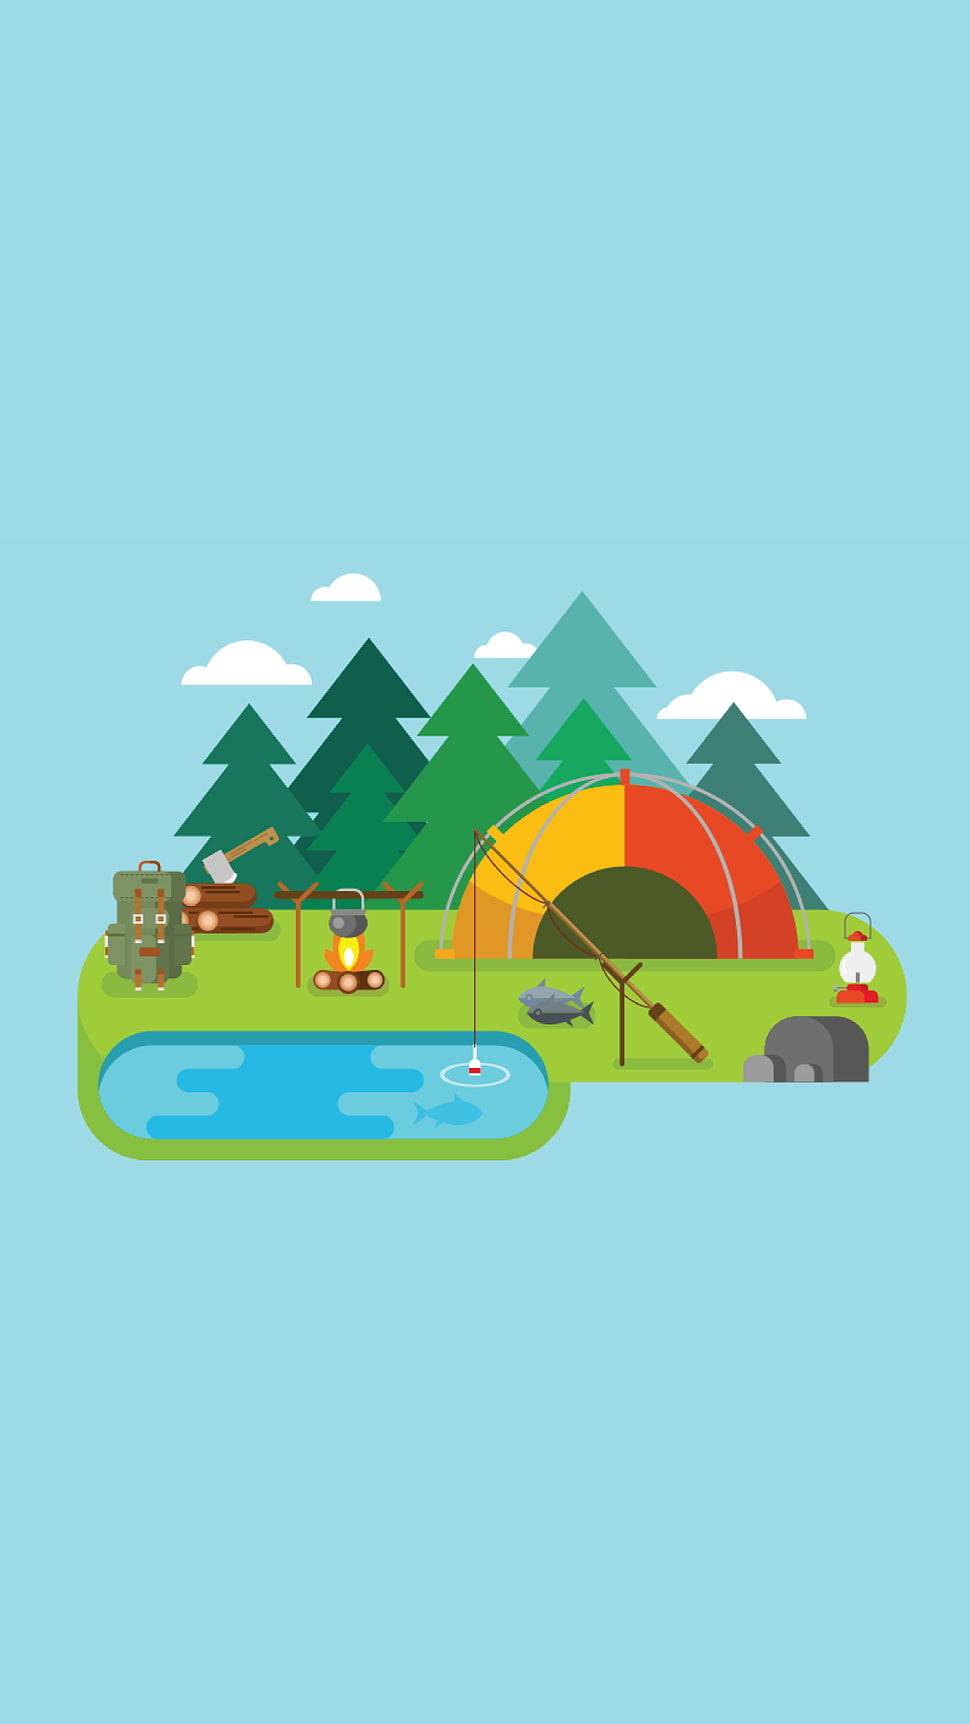 green, yellow, and red tent illustration, camping, minimalism HD wallpaper